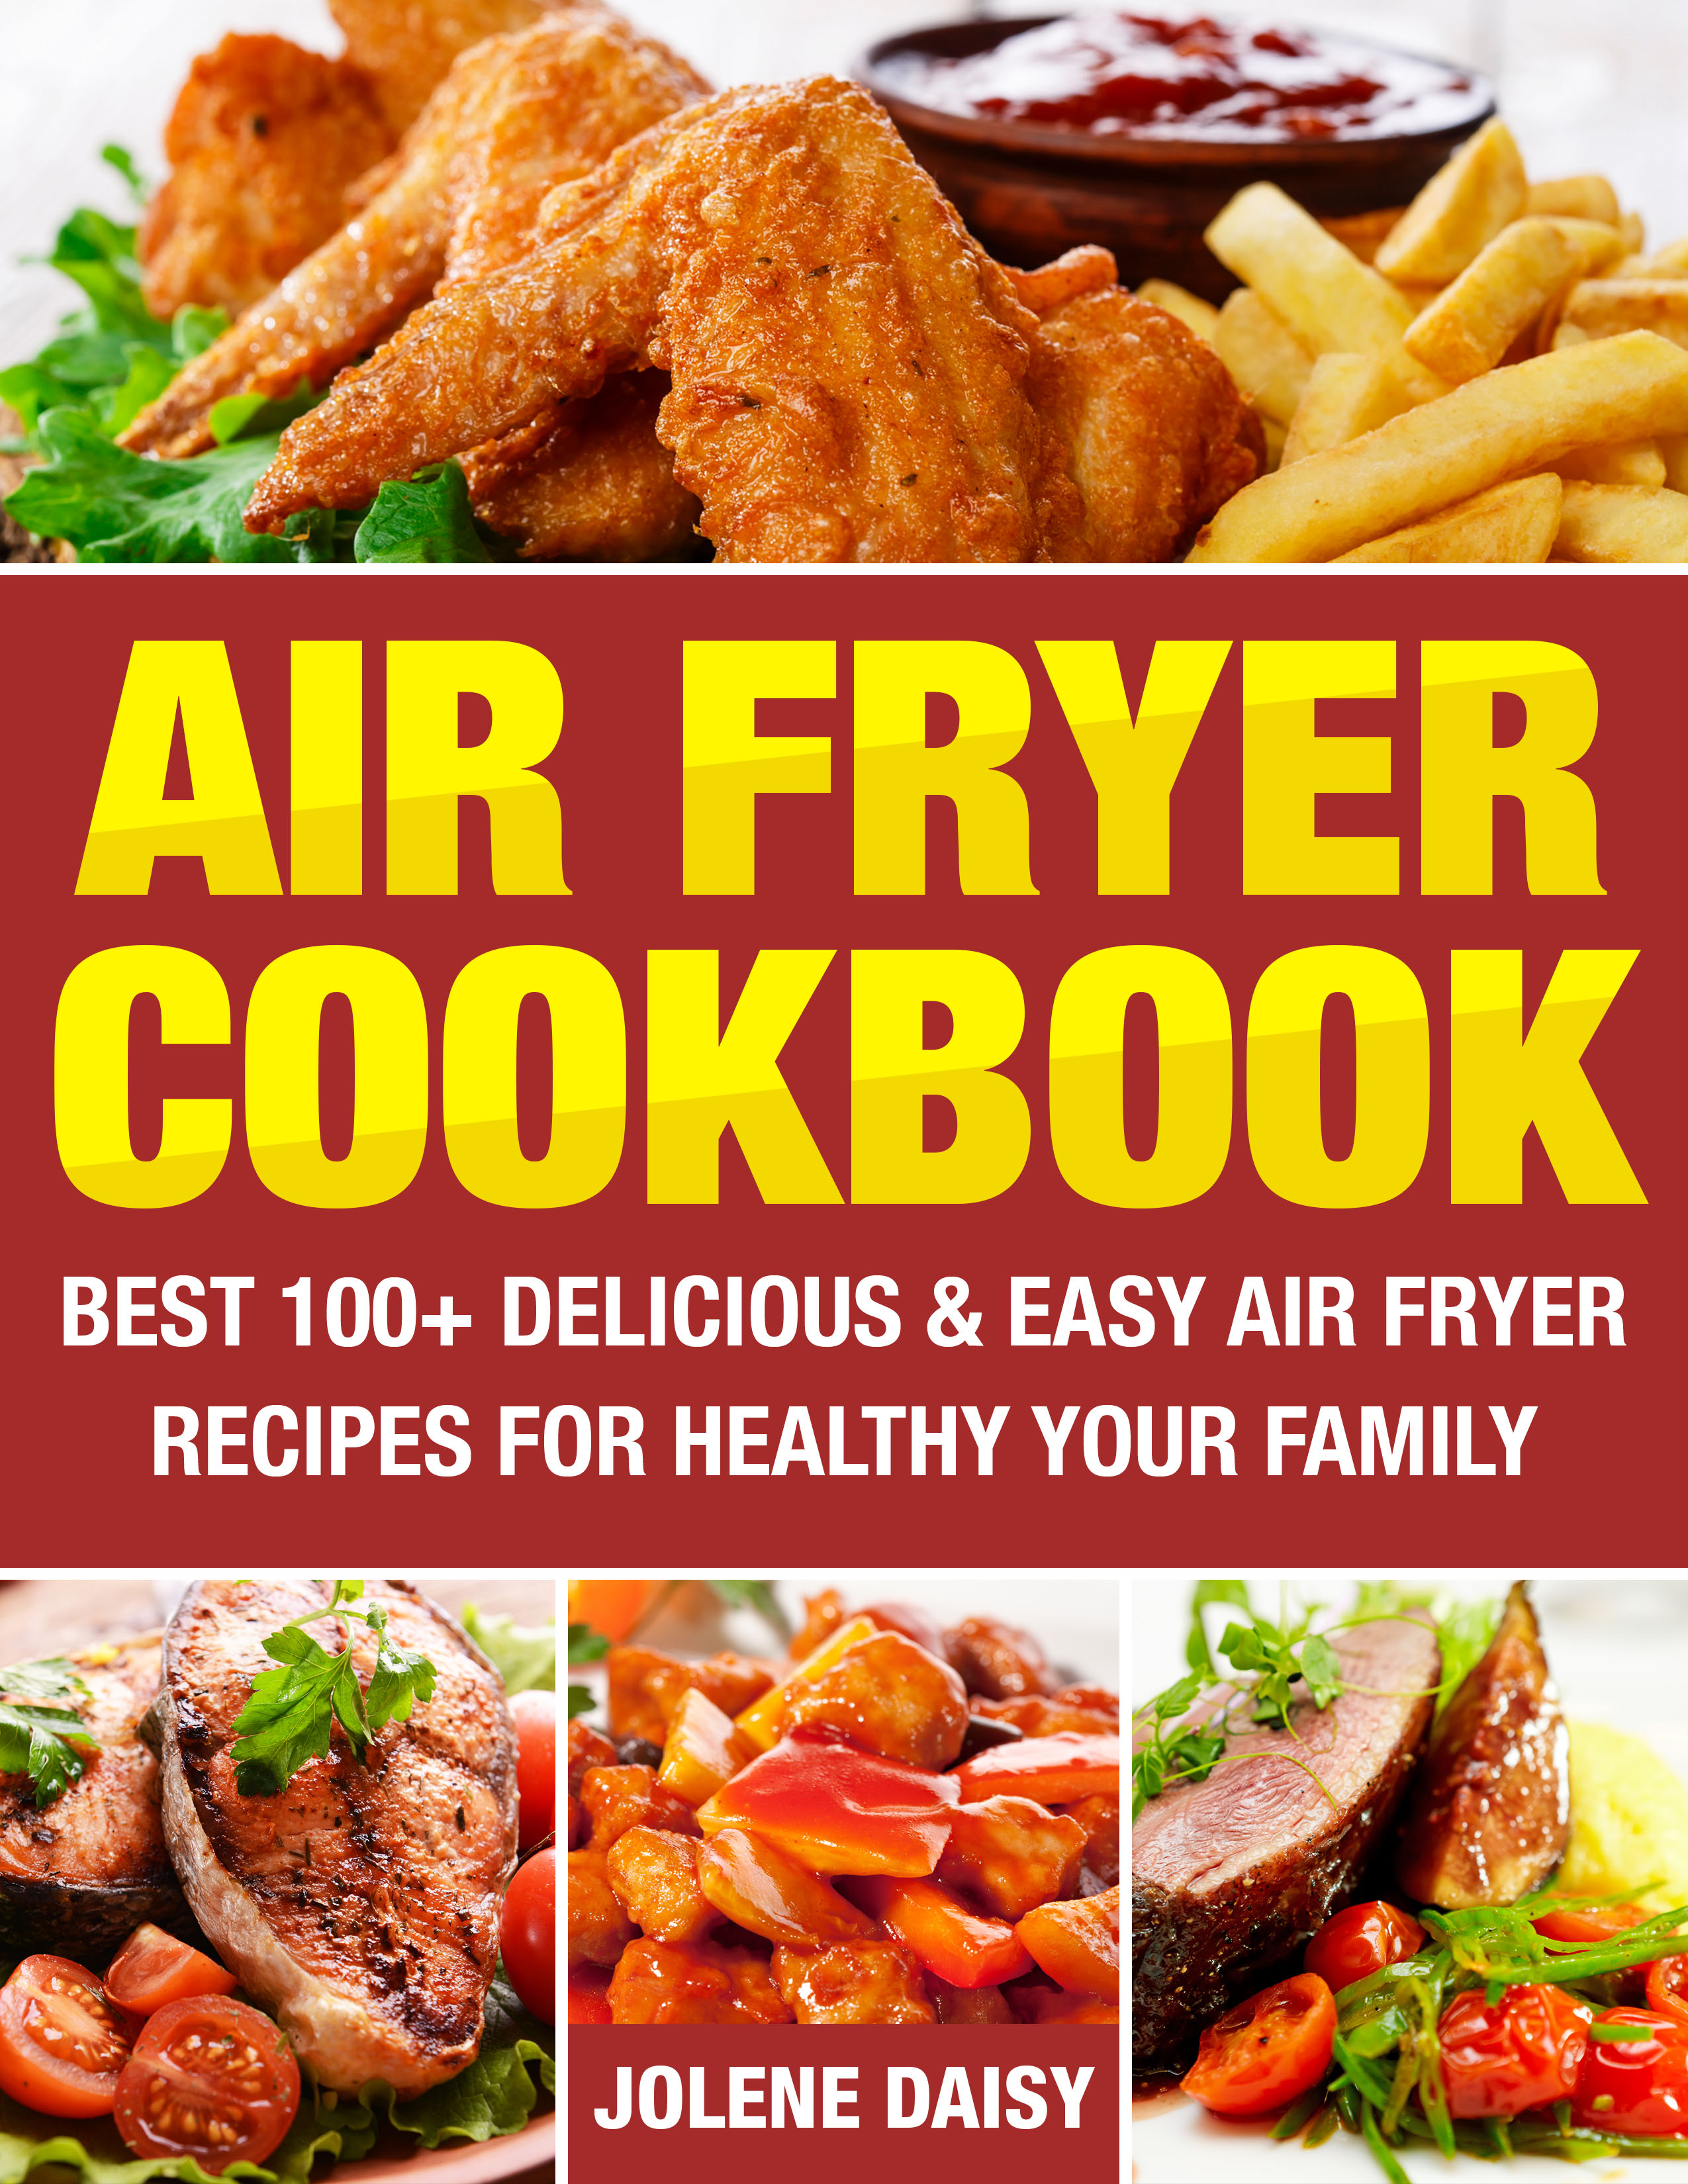 FREE: Air Fryer Cookbook: Best 100+ Delicious & Easy Air Fryer Recipes for Healthy Your Family by Jolene Daisy